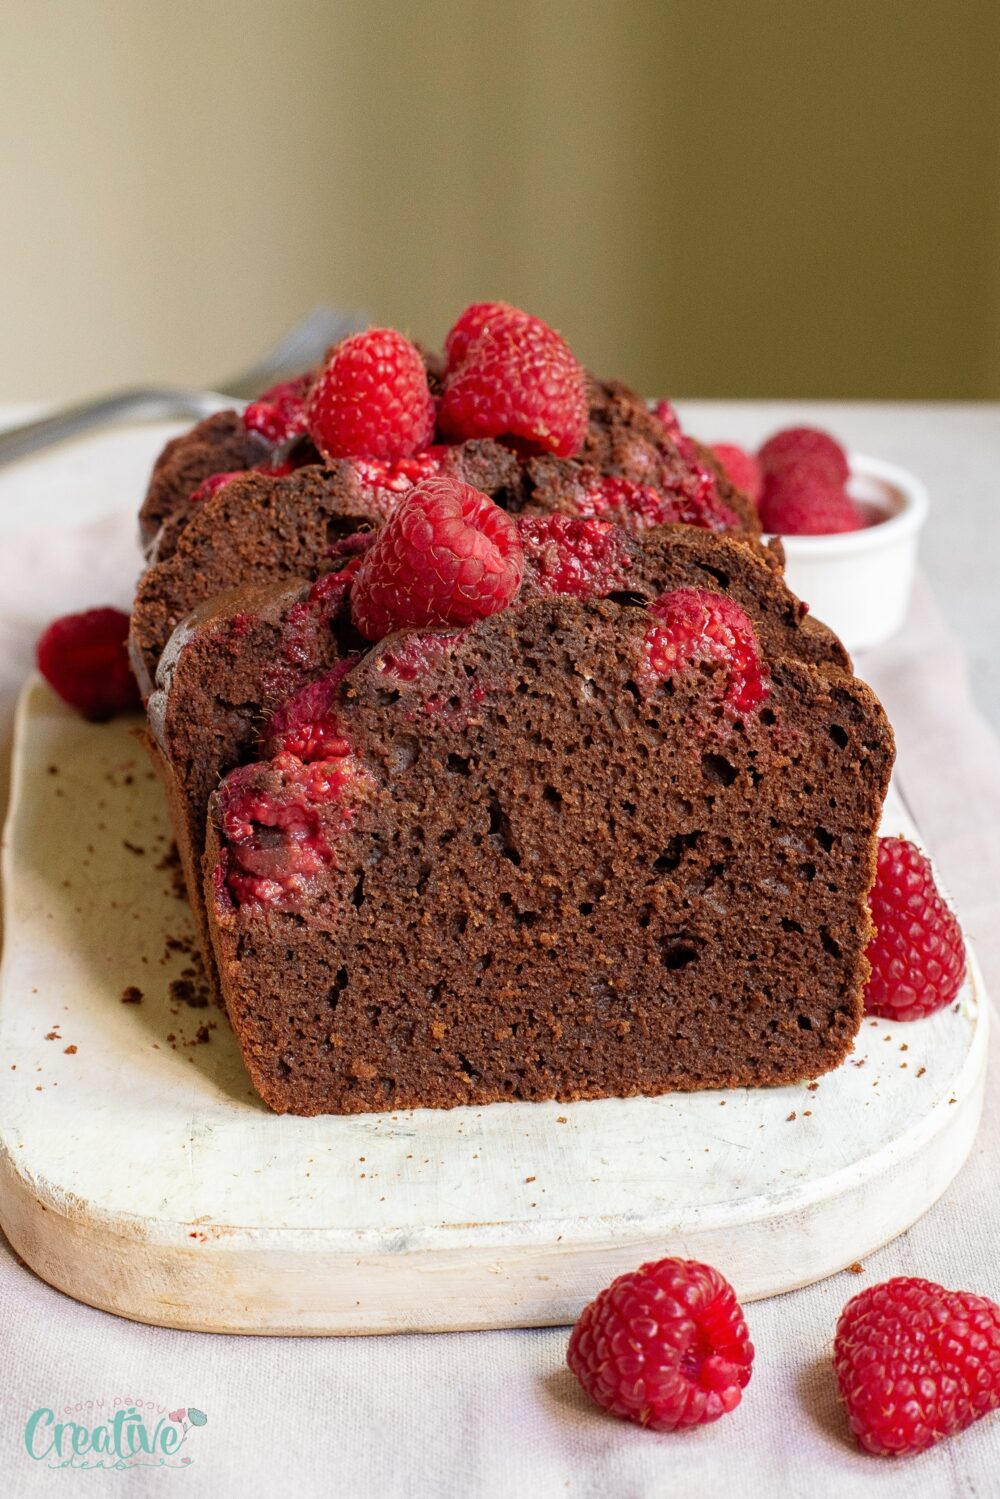 Moist chocolate pound cake - guaranteed to please your taste buds. Perfect for a special indulgence!